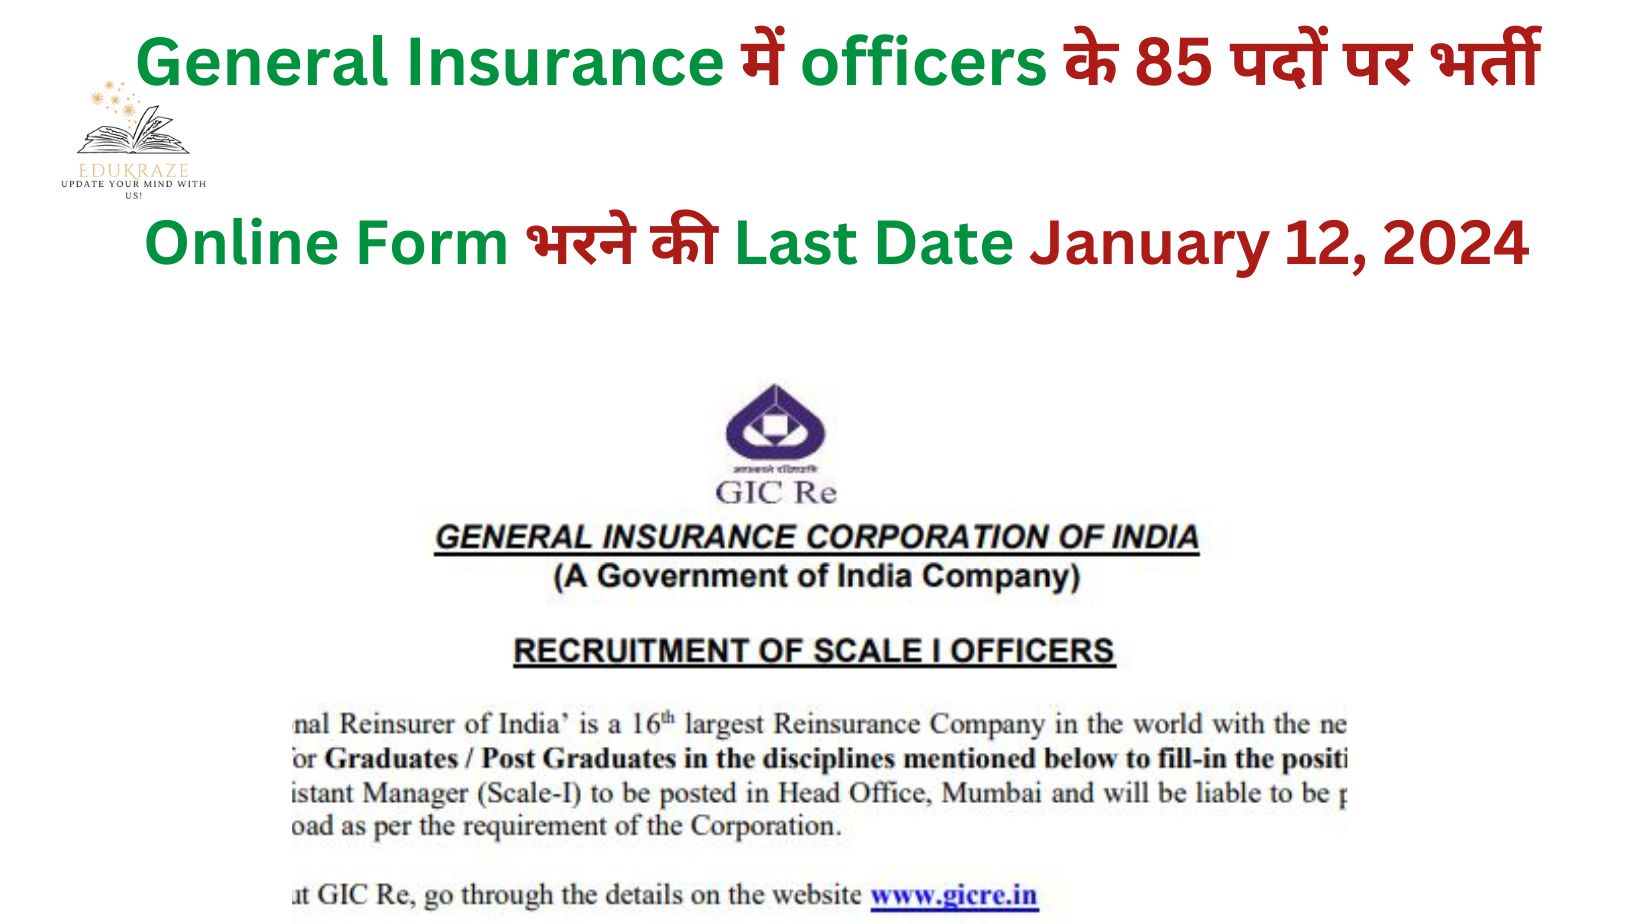 General Insurance Recruitment out for 85 Posts, Apply before 12.01.2024